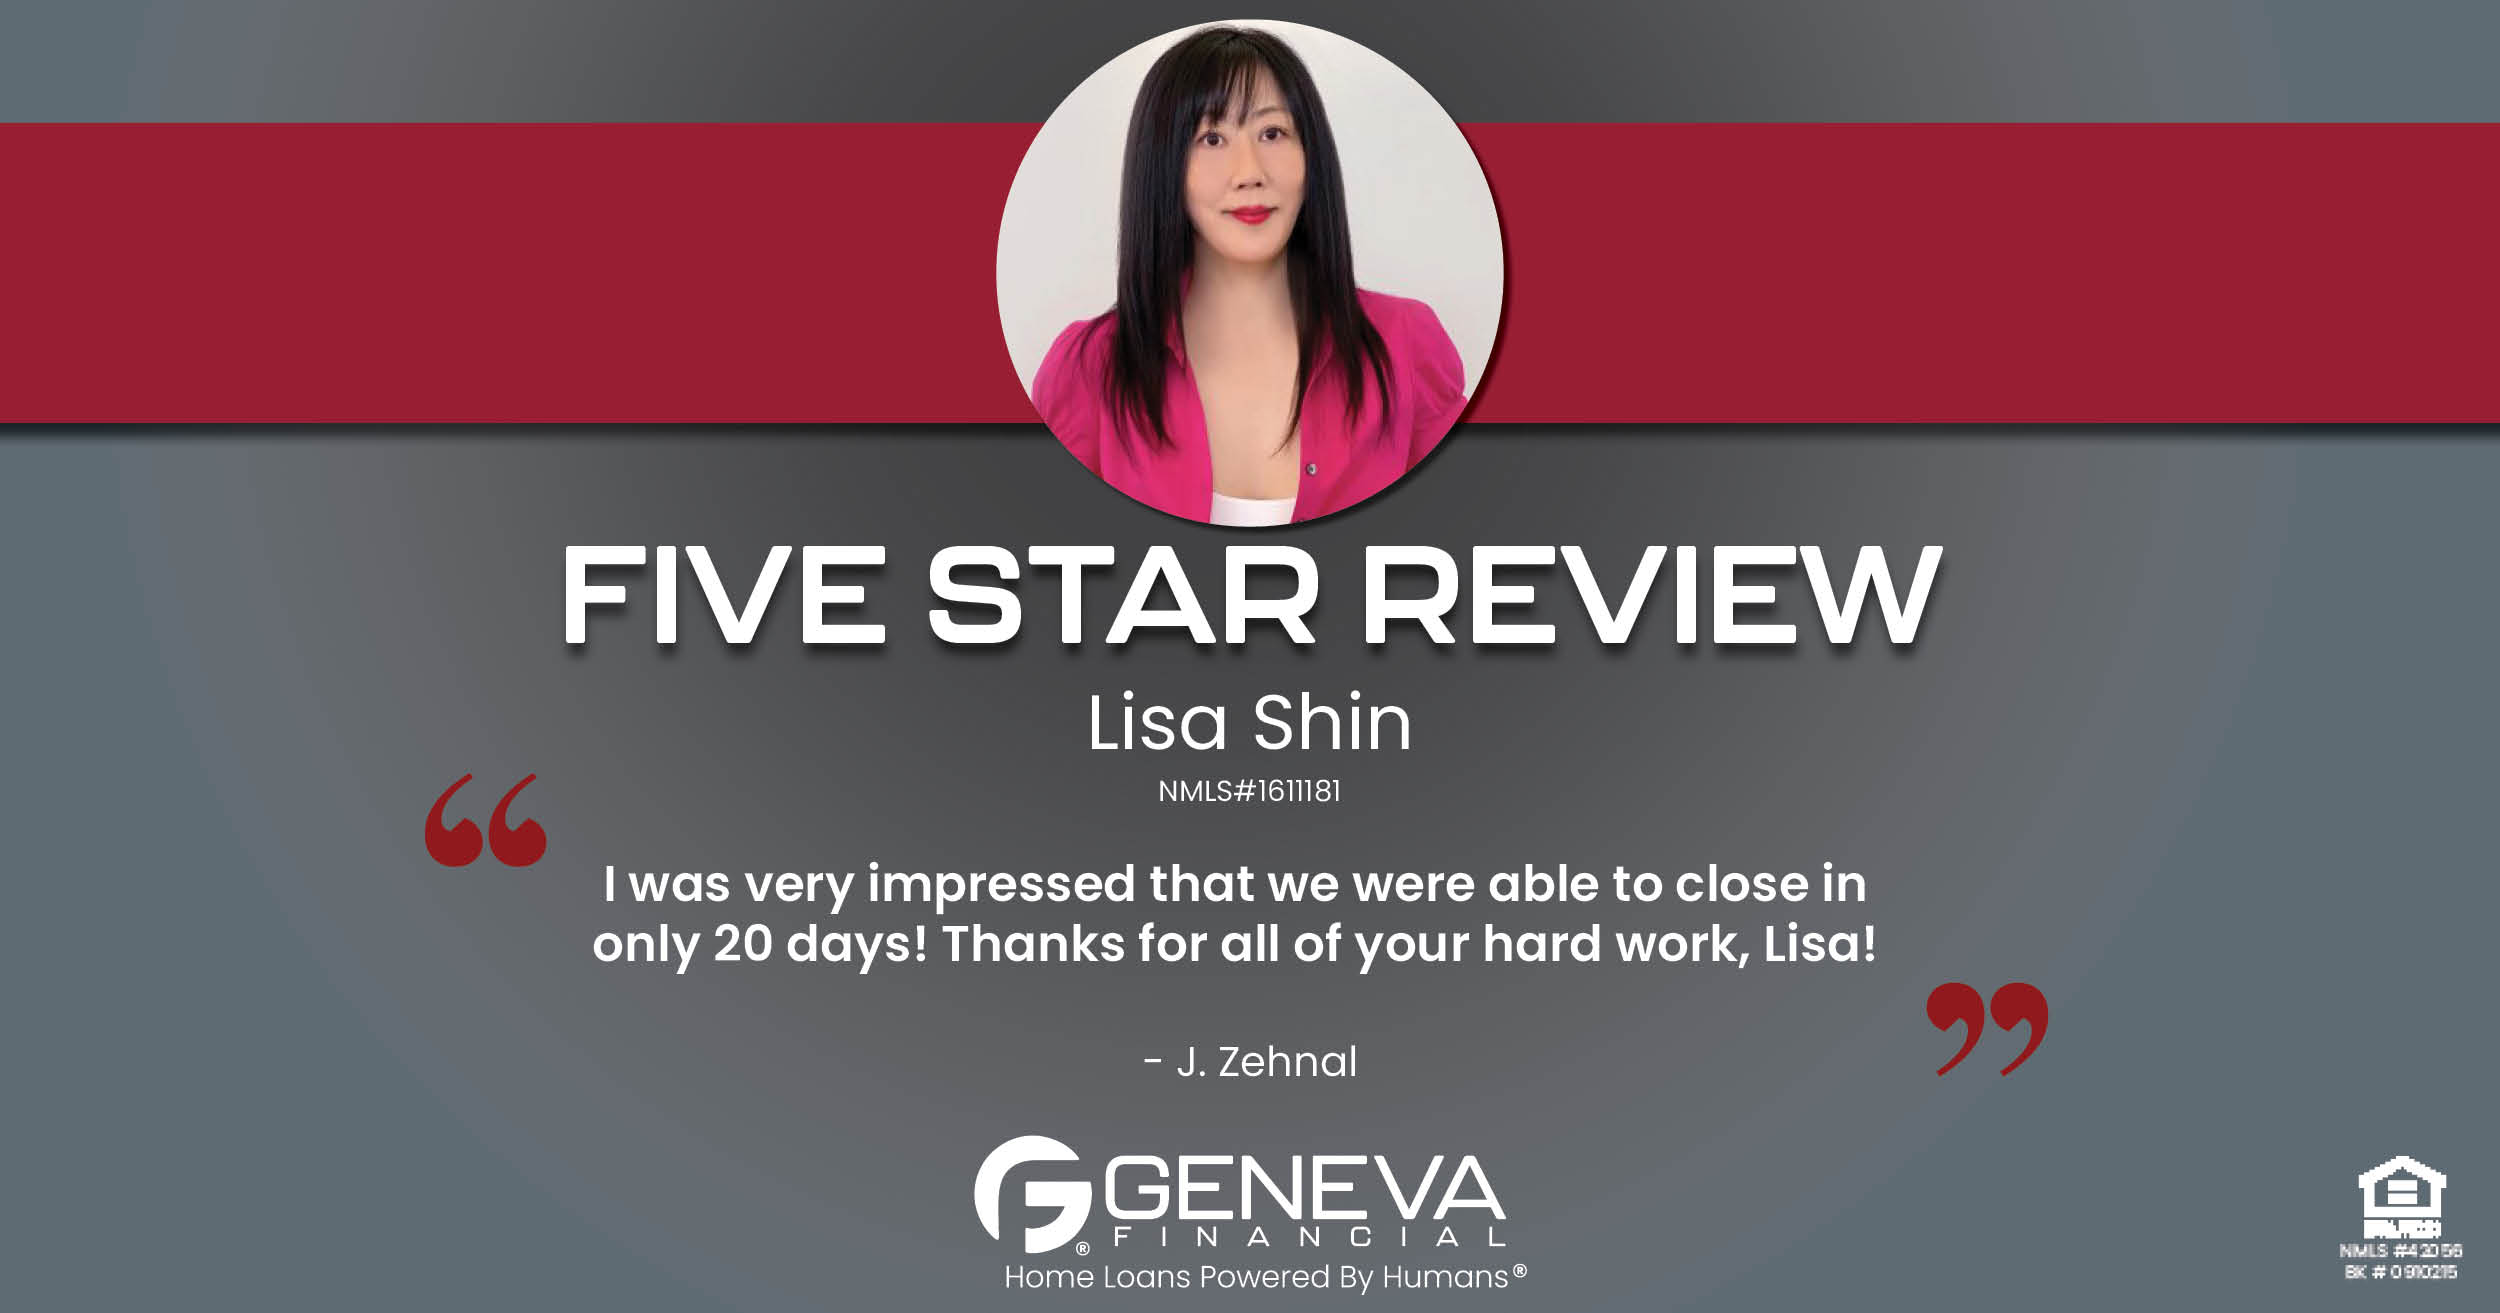 5 Star Review for Lisa Shin, Licensed Mortgage Loan Officer with Geneva Financial, Las Vegas, NV – Home Loans Powered by Humans®.